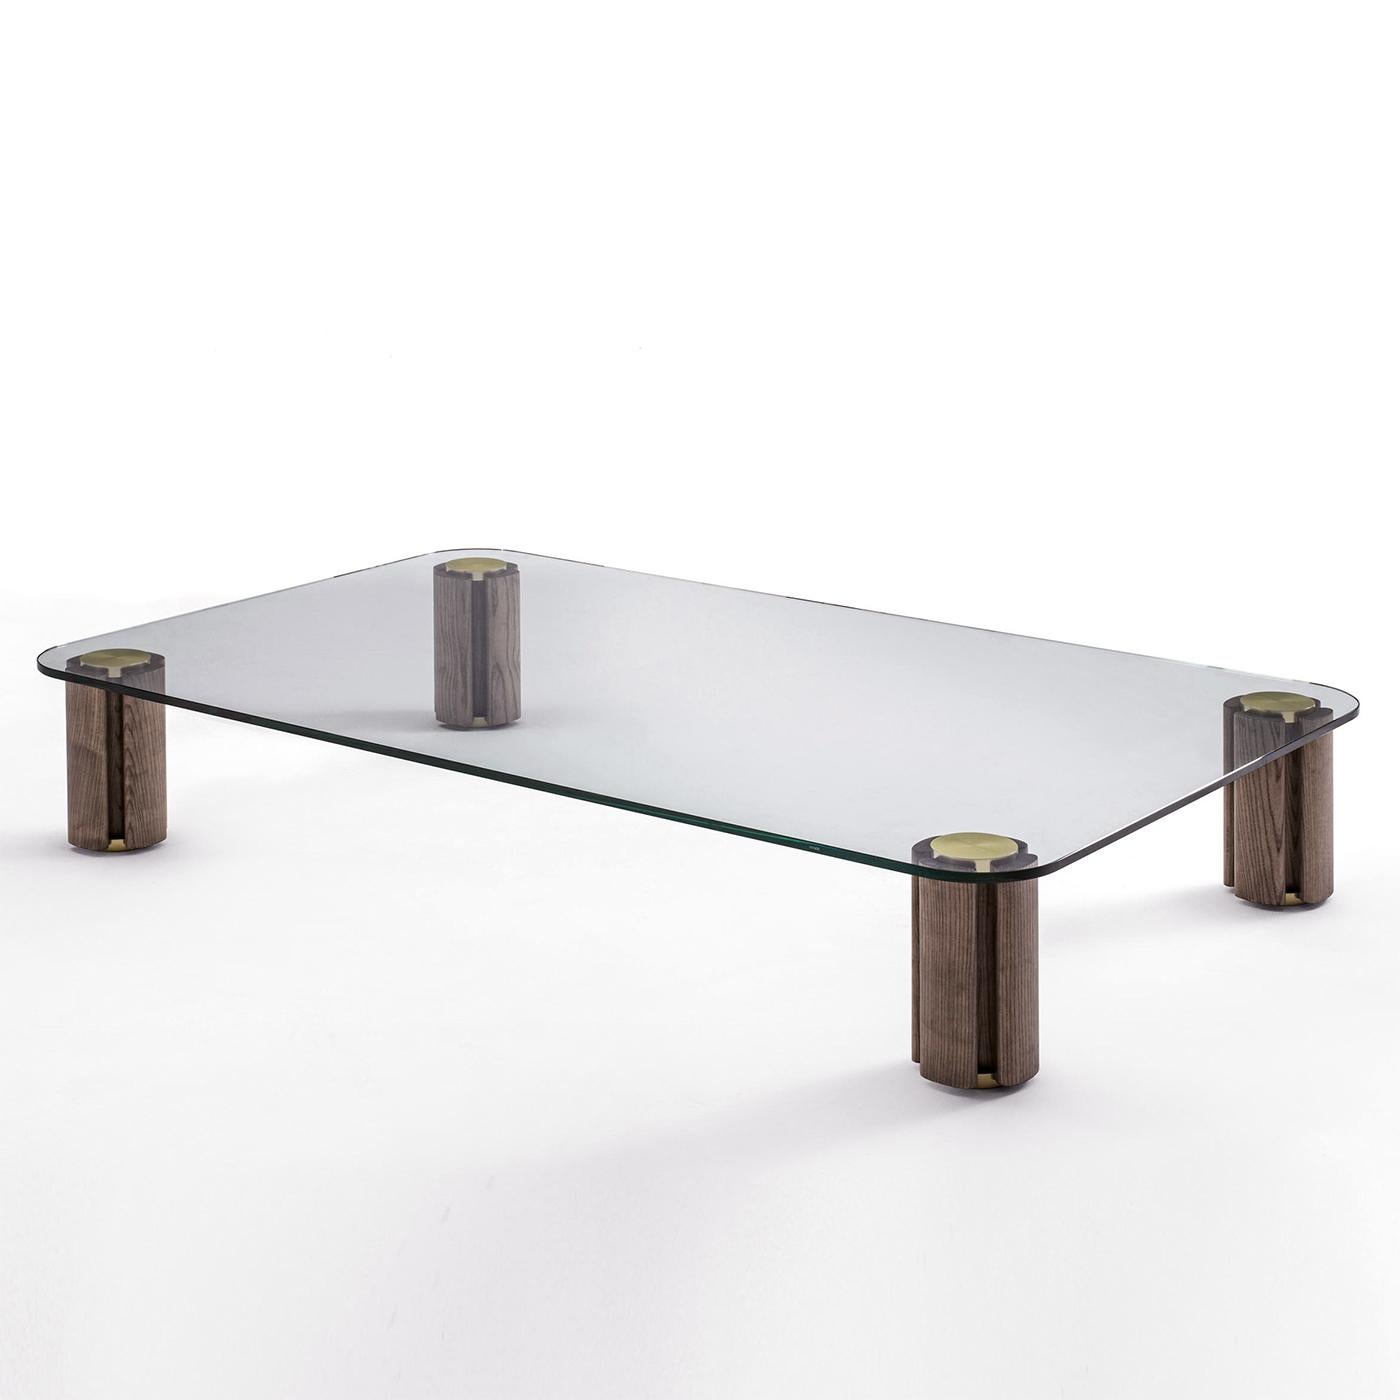 Coffee Table Mathilda rectangular with clear glass top,
15 mm thickness. With 4 feet made with solid walnut wood
with solid brass central poles in brushed finish.
Also available in square coffee table or in side table,
on request.
Also